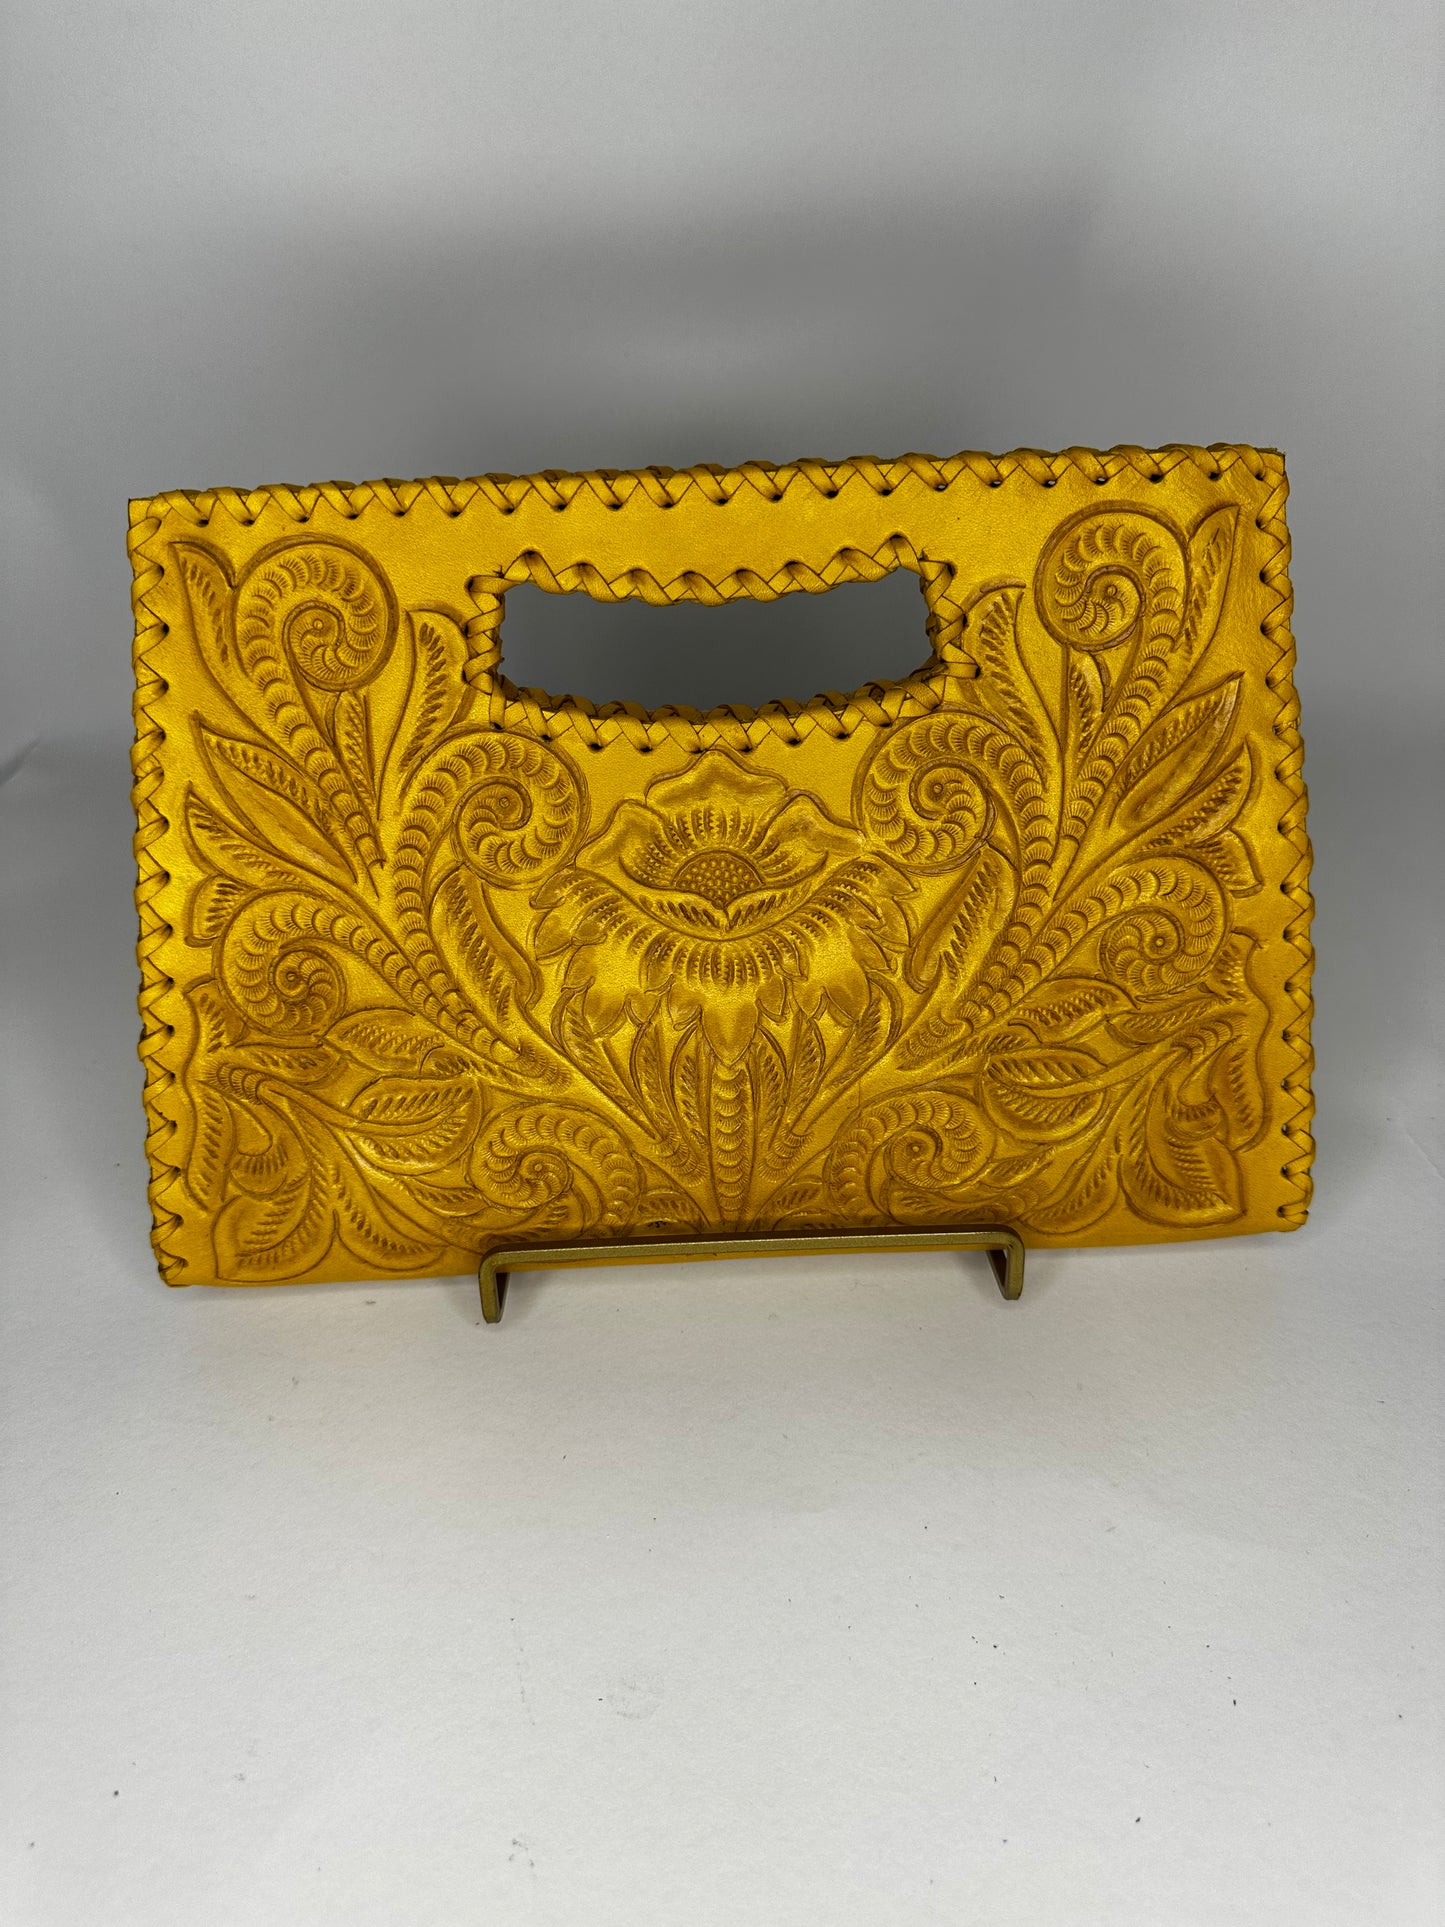 Small Mexican leather handbag with traditional design hand etched throughout the bag. Has handle mid top. leather stitching all around. Color mustard yellow.